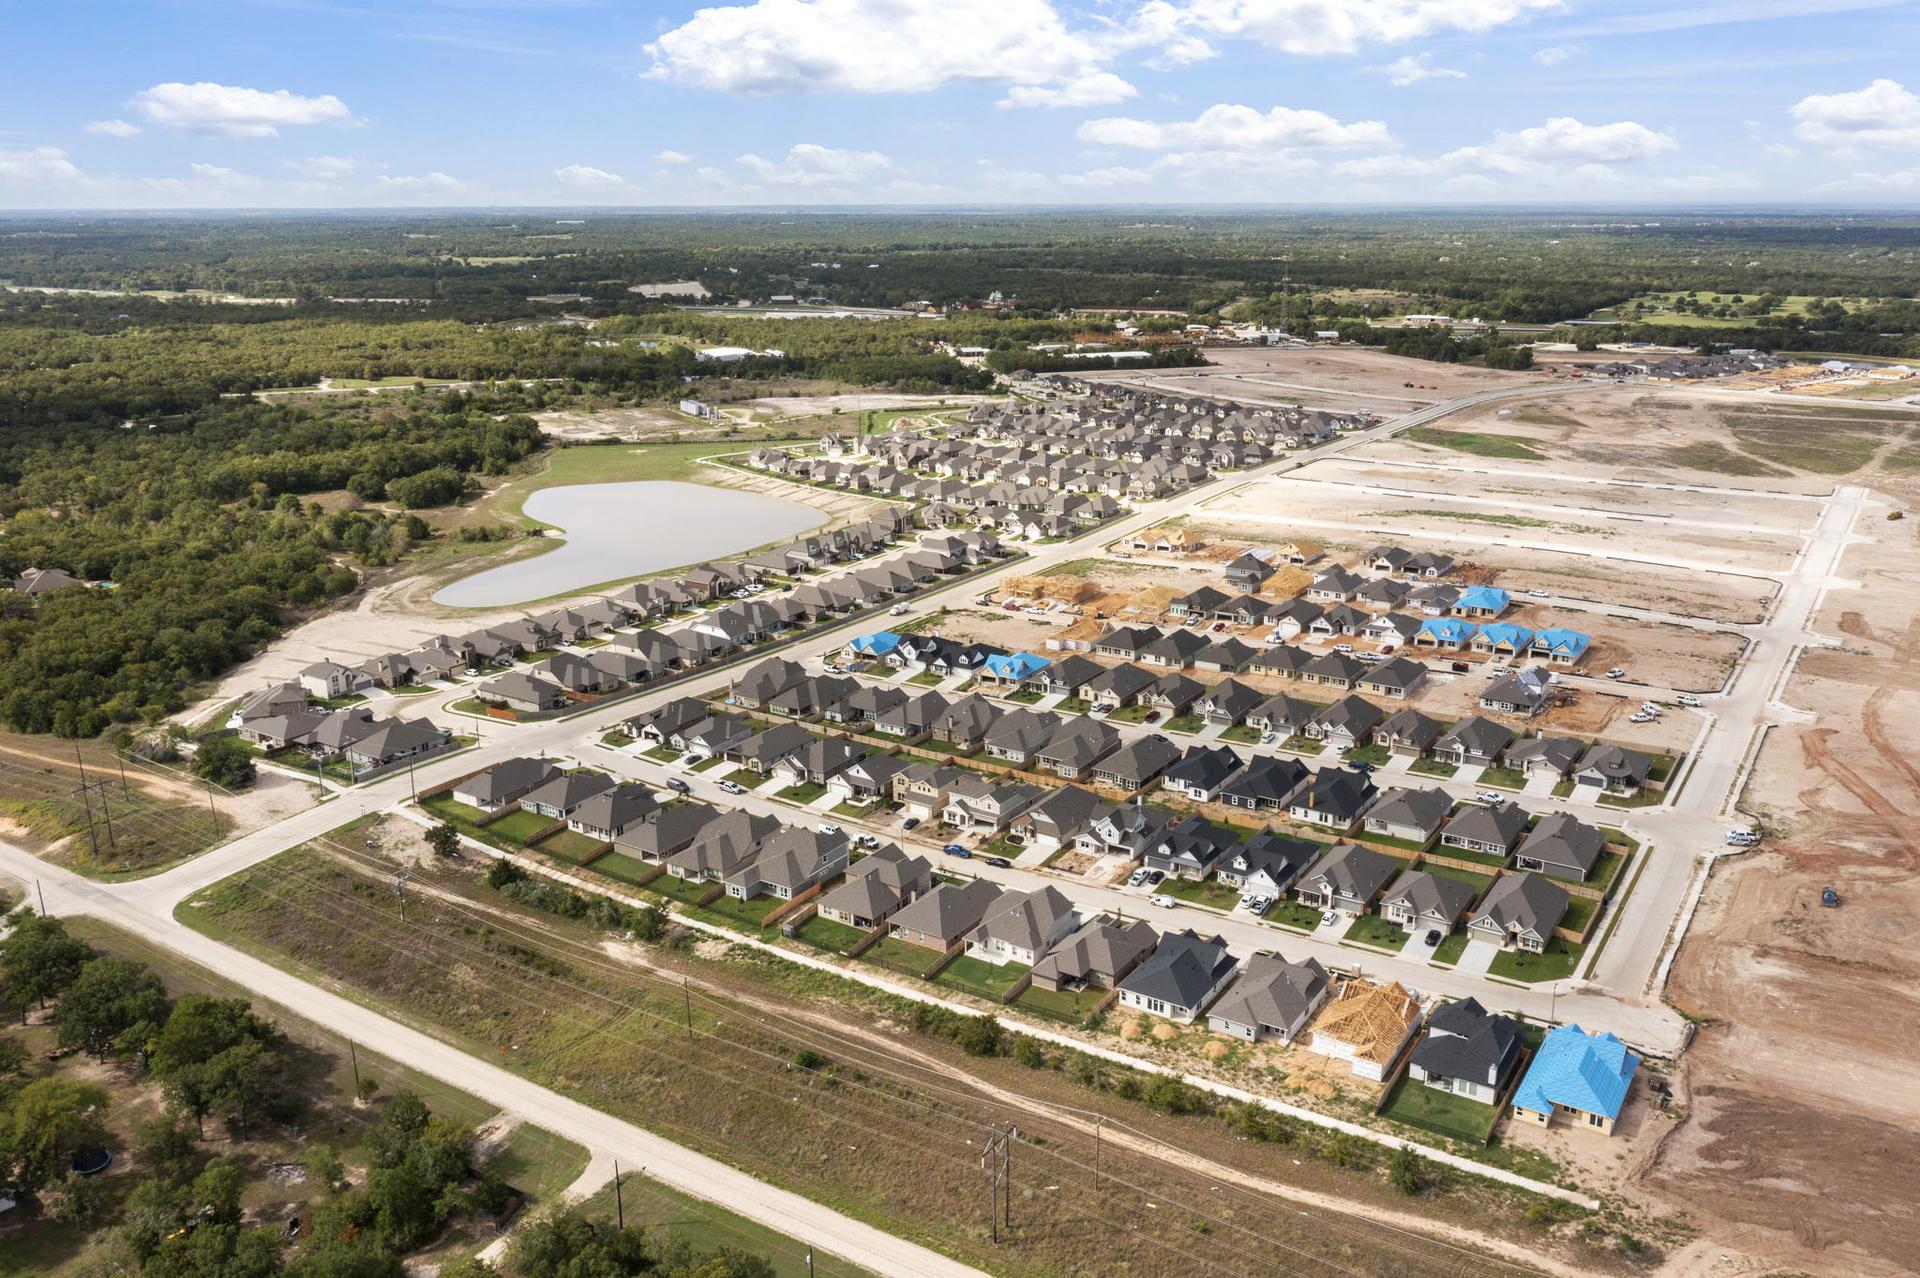 Southern Pointe New Homes in College Station, TX